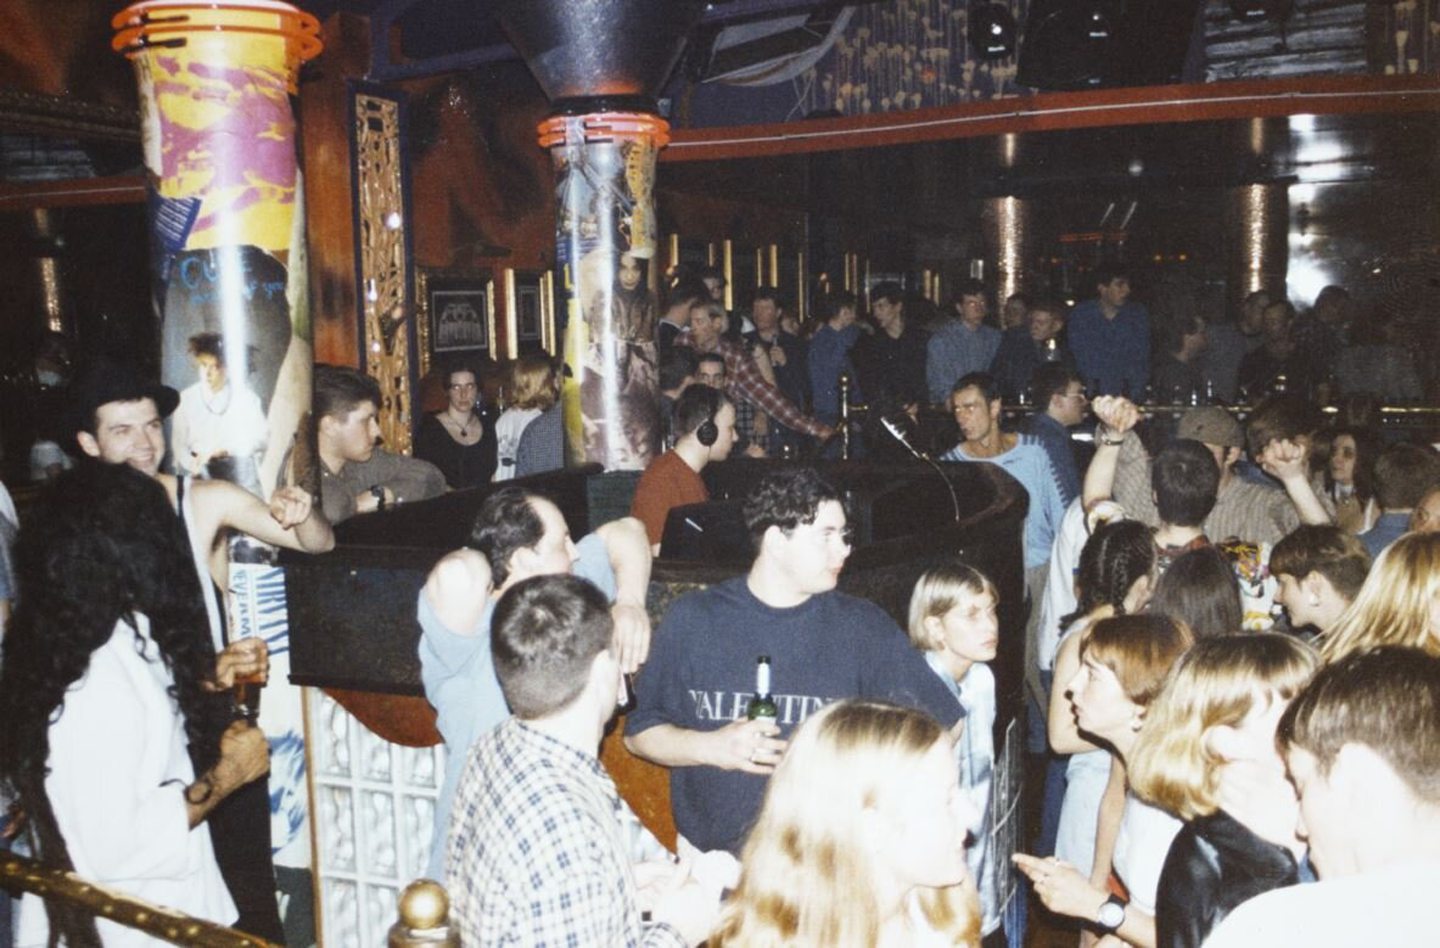 Clubgoers in the 1990s.